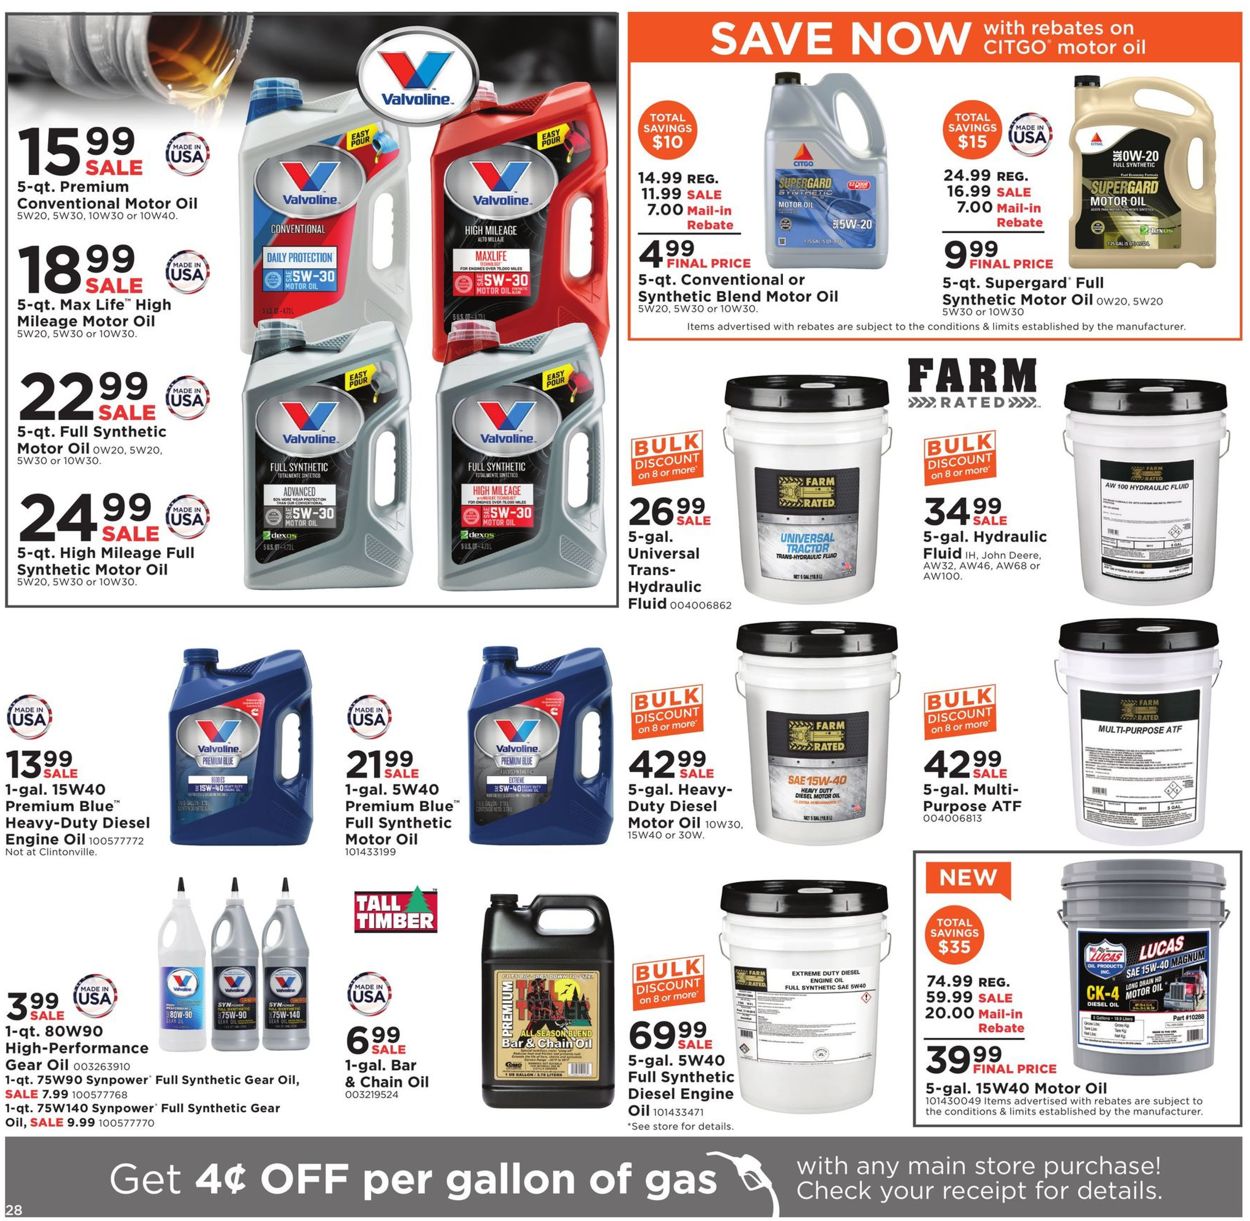 mills-fleet-farm-current-weekly-ad-04-10-04-18-2020-28-frequent